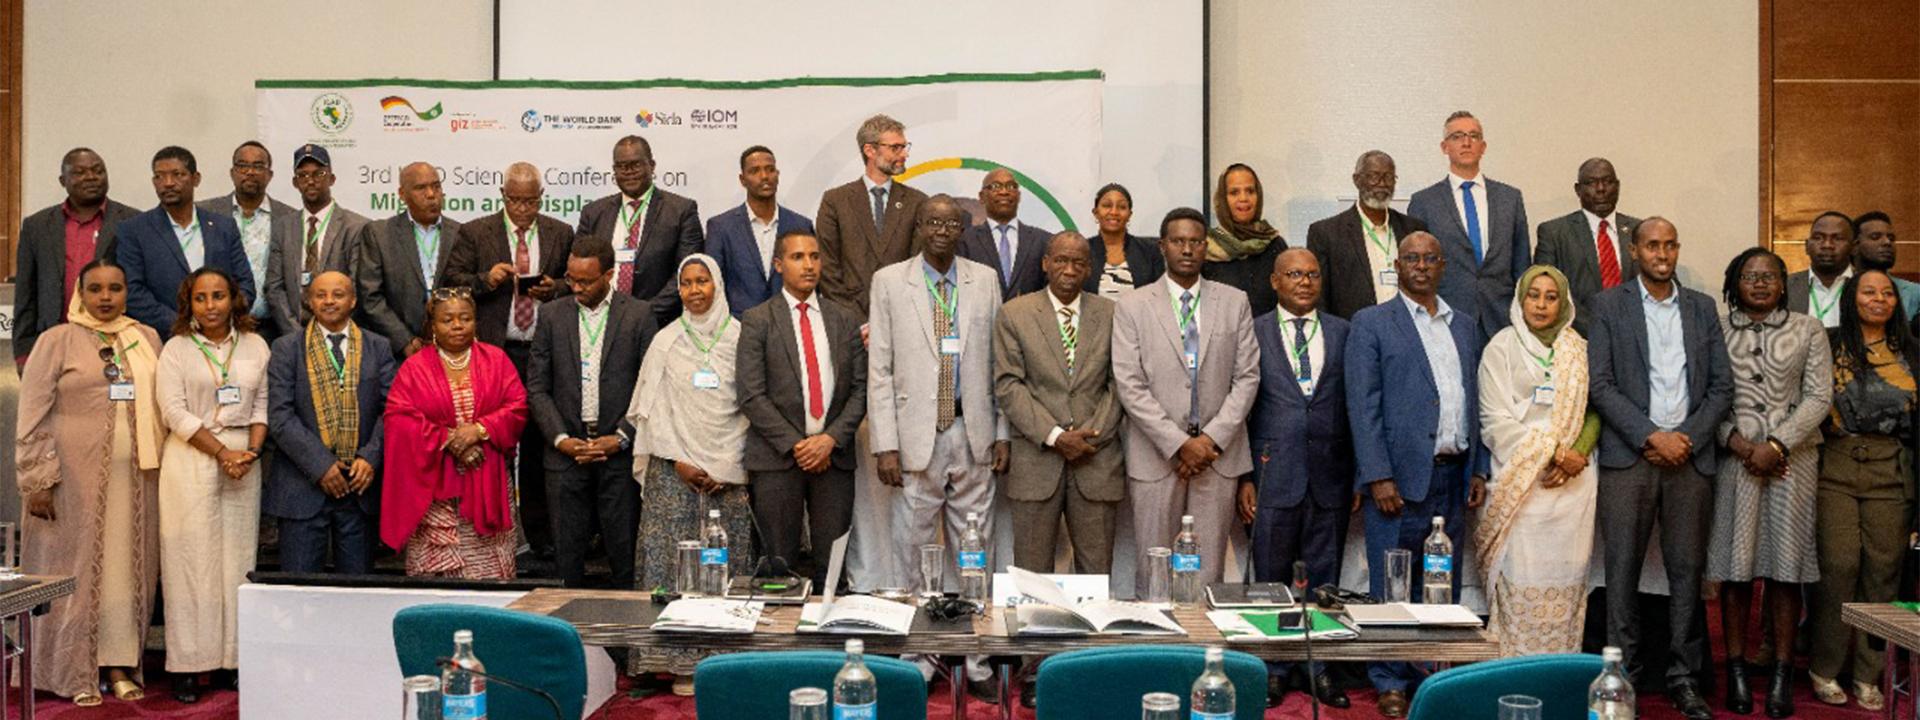 3rd IGAD Regional Scientific Conference on Migration and Displacement